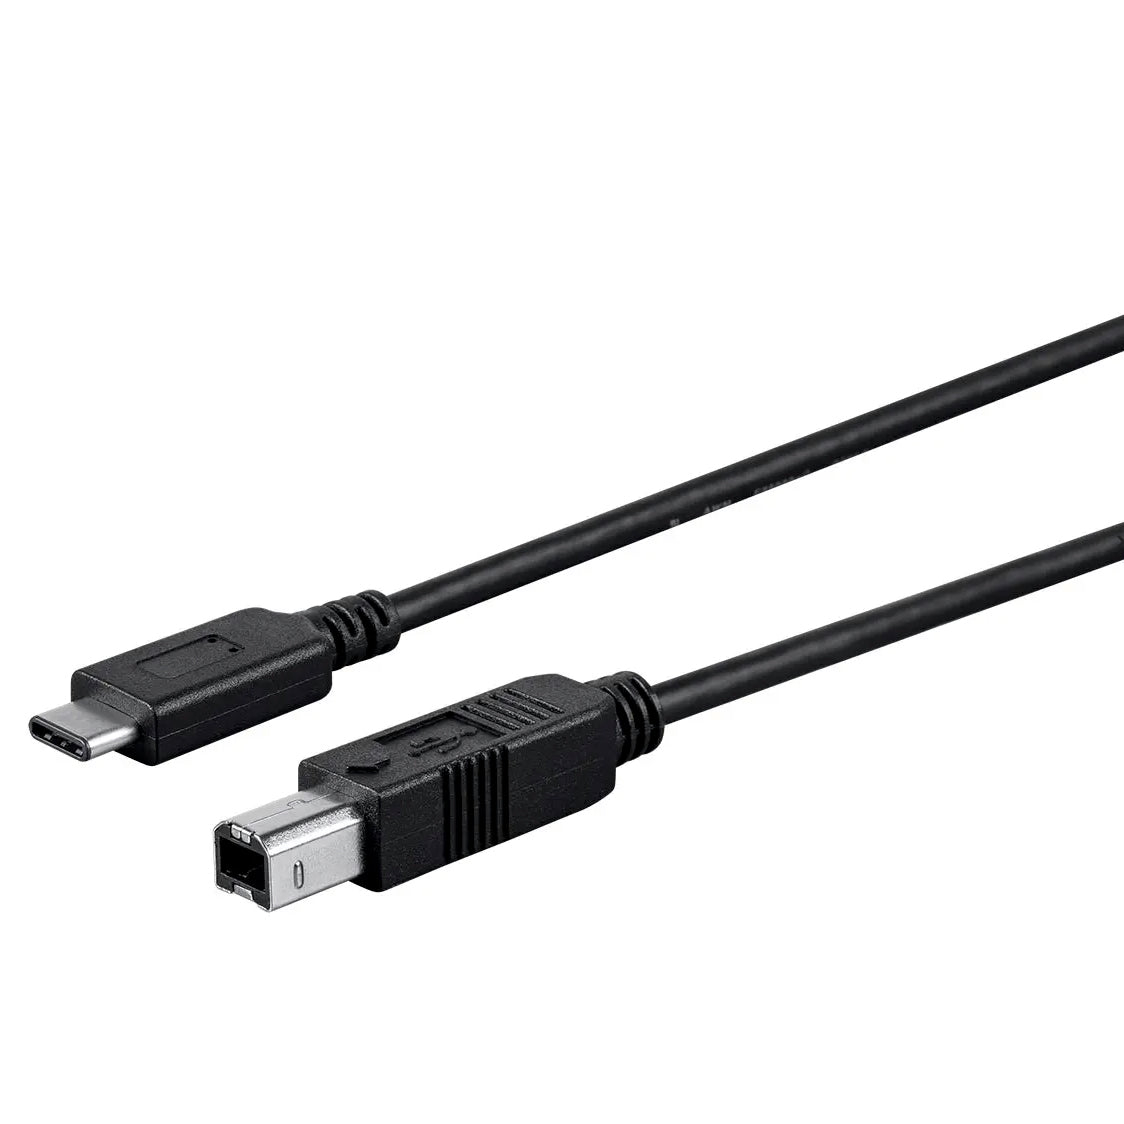 USB-C to USB-B Cable, 6.6ft - Black